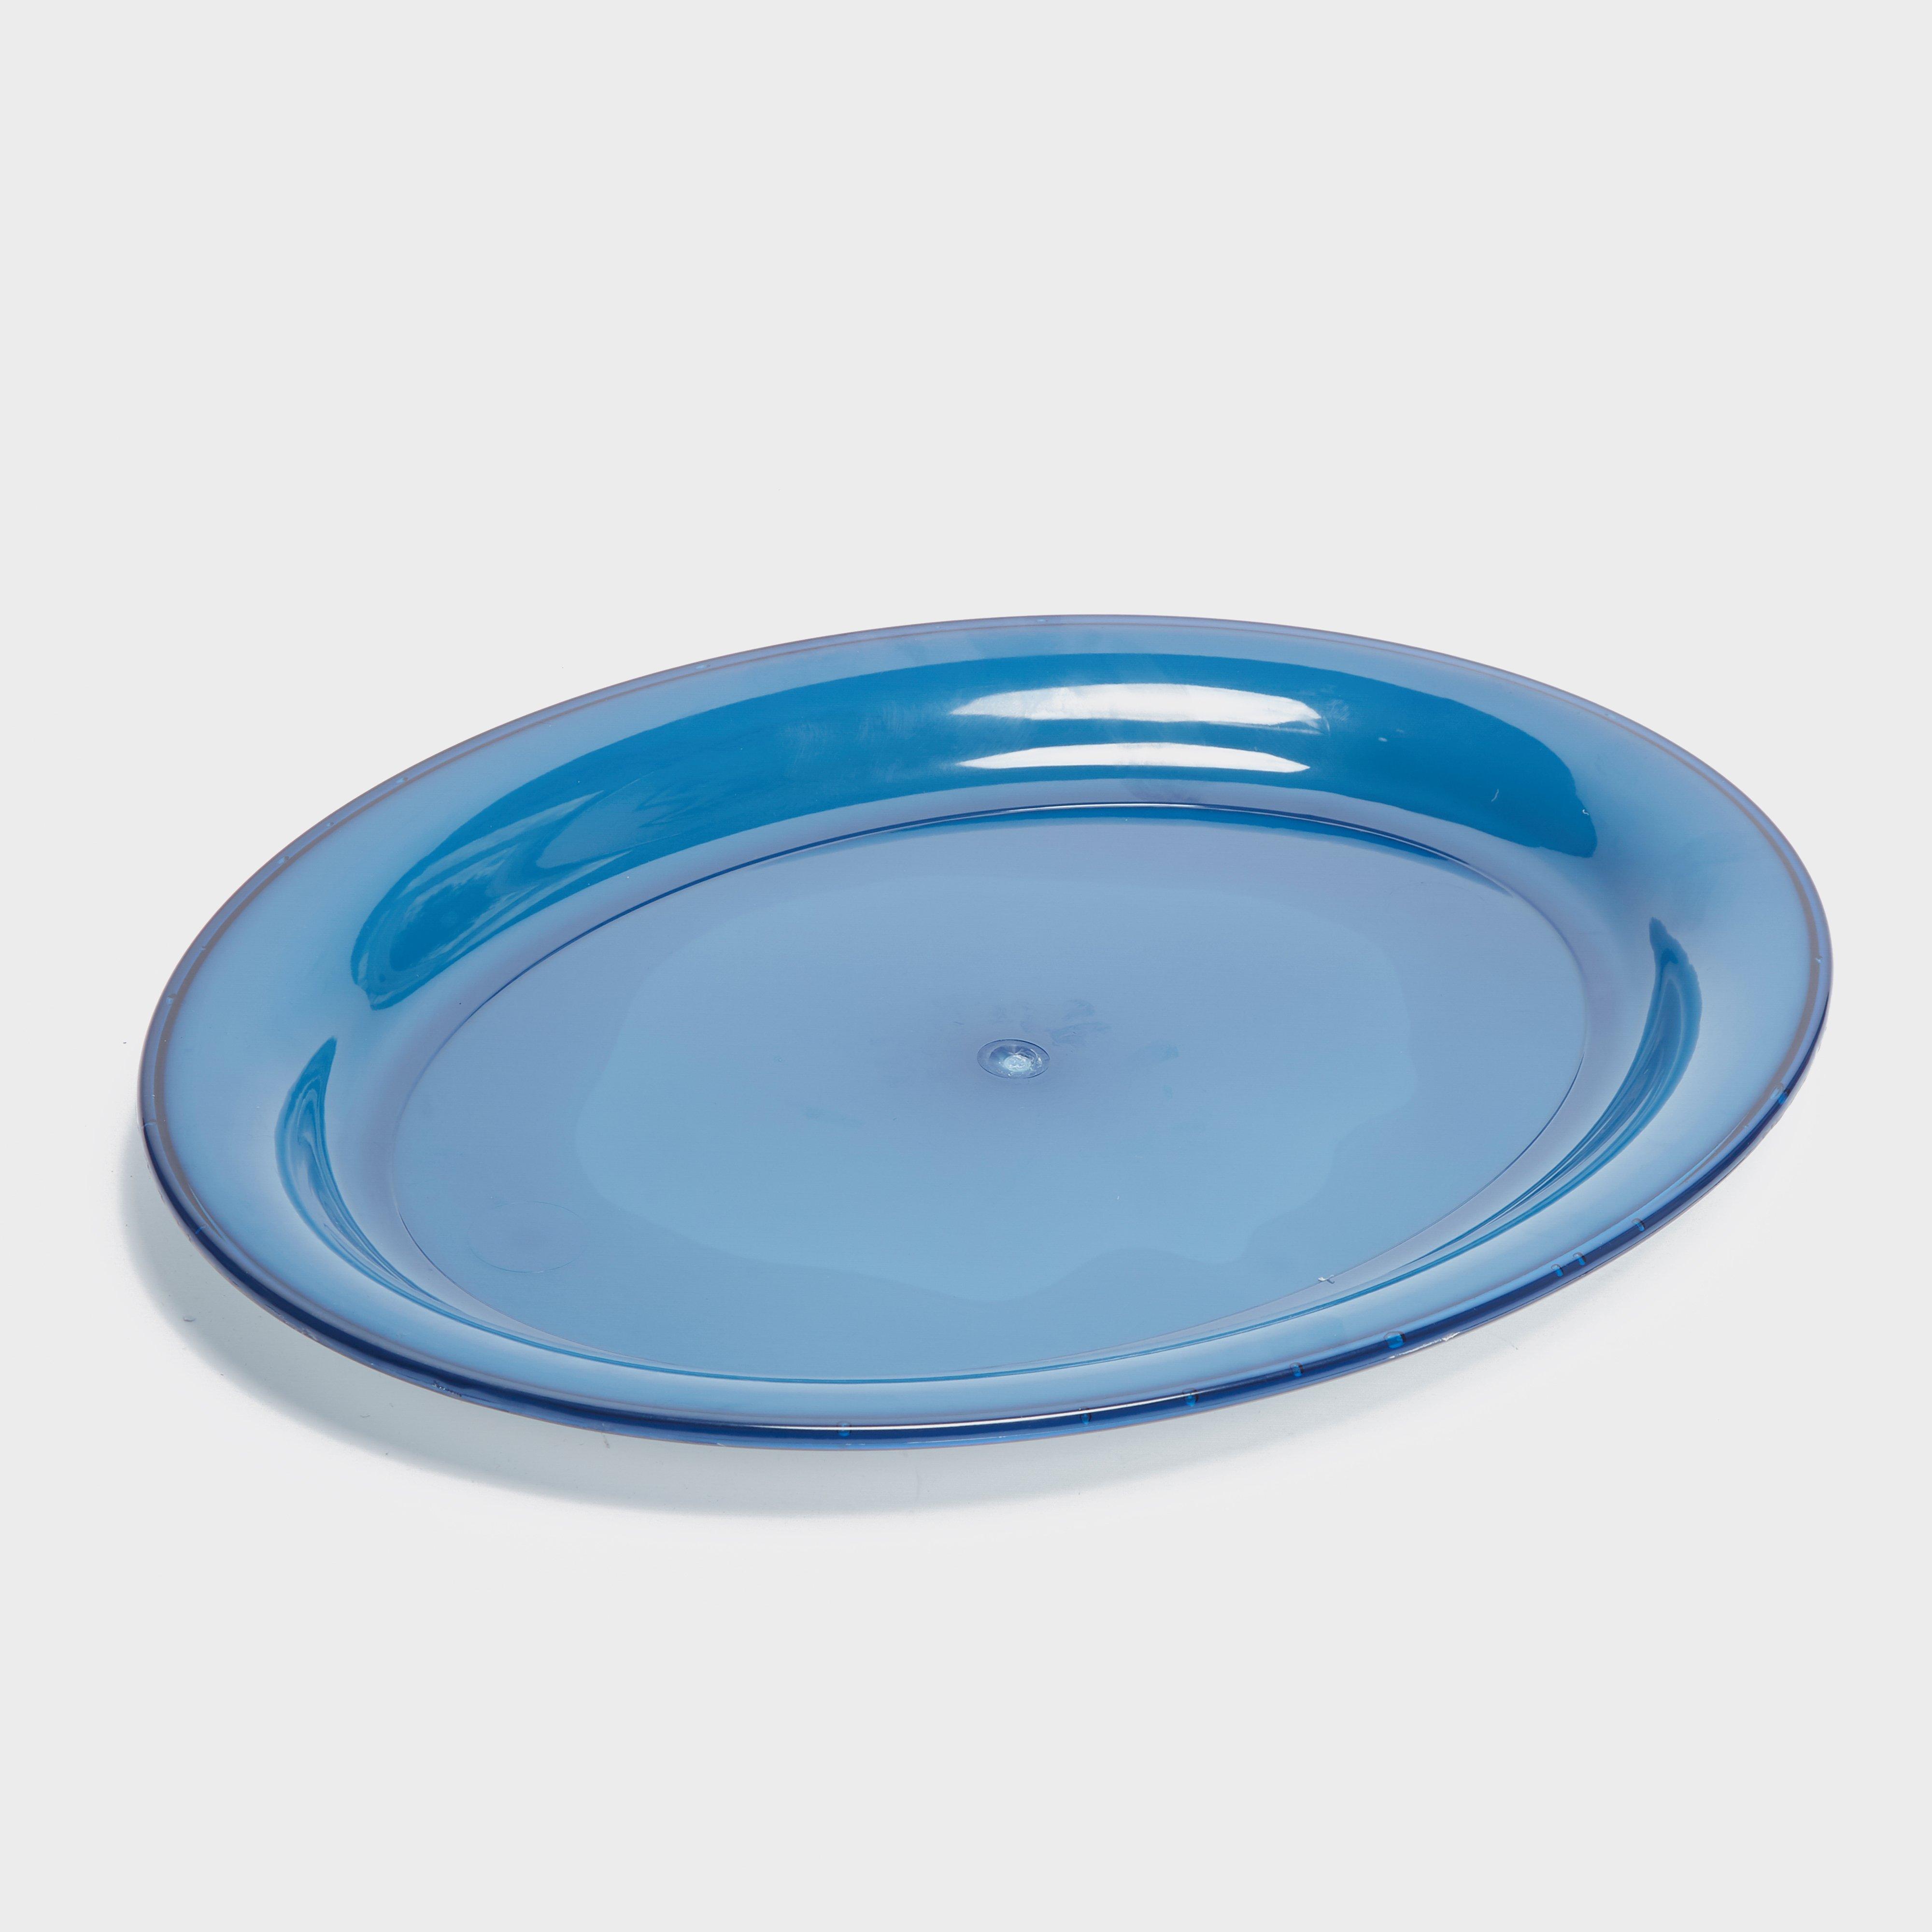 Hi-gear Deluxe Plate (large)  Blue